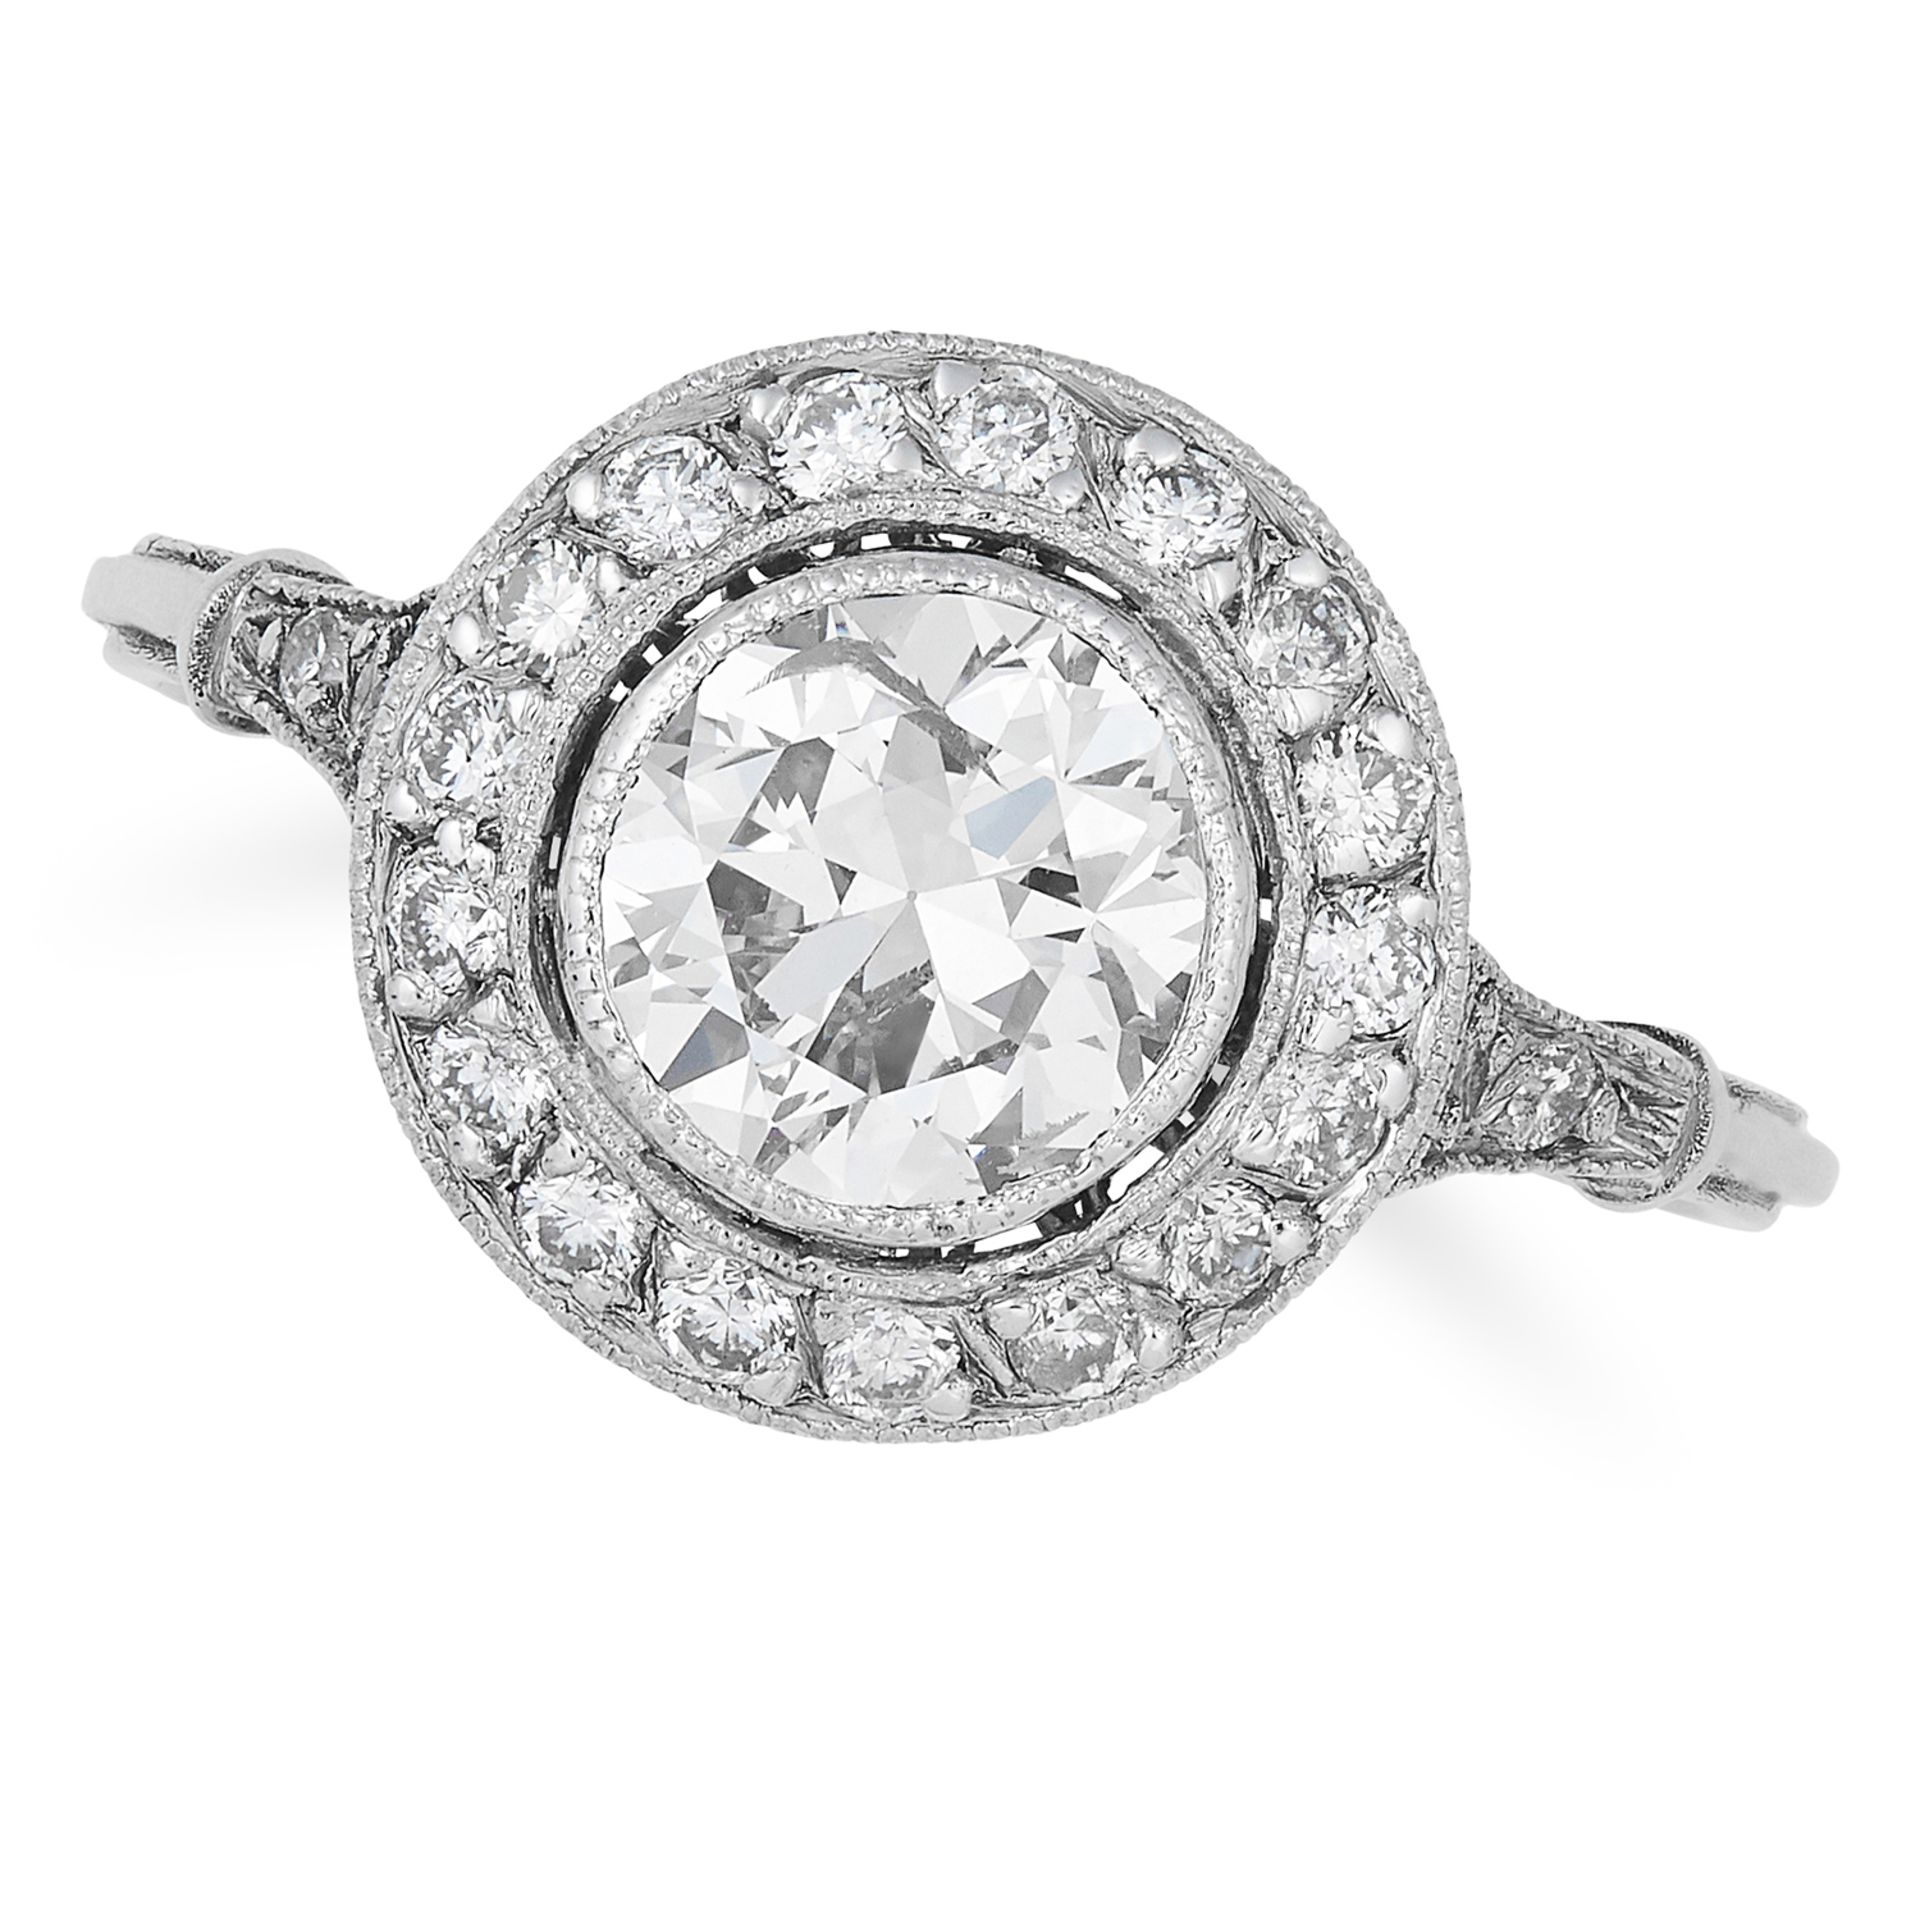 ANTIQUE DIAMOND DRESS RING set with a cluster of round cut diamonds totalling approximately 2.92